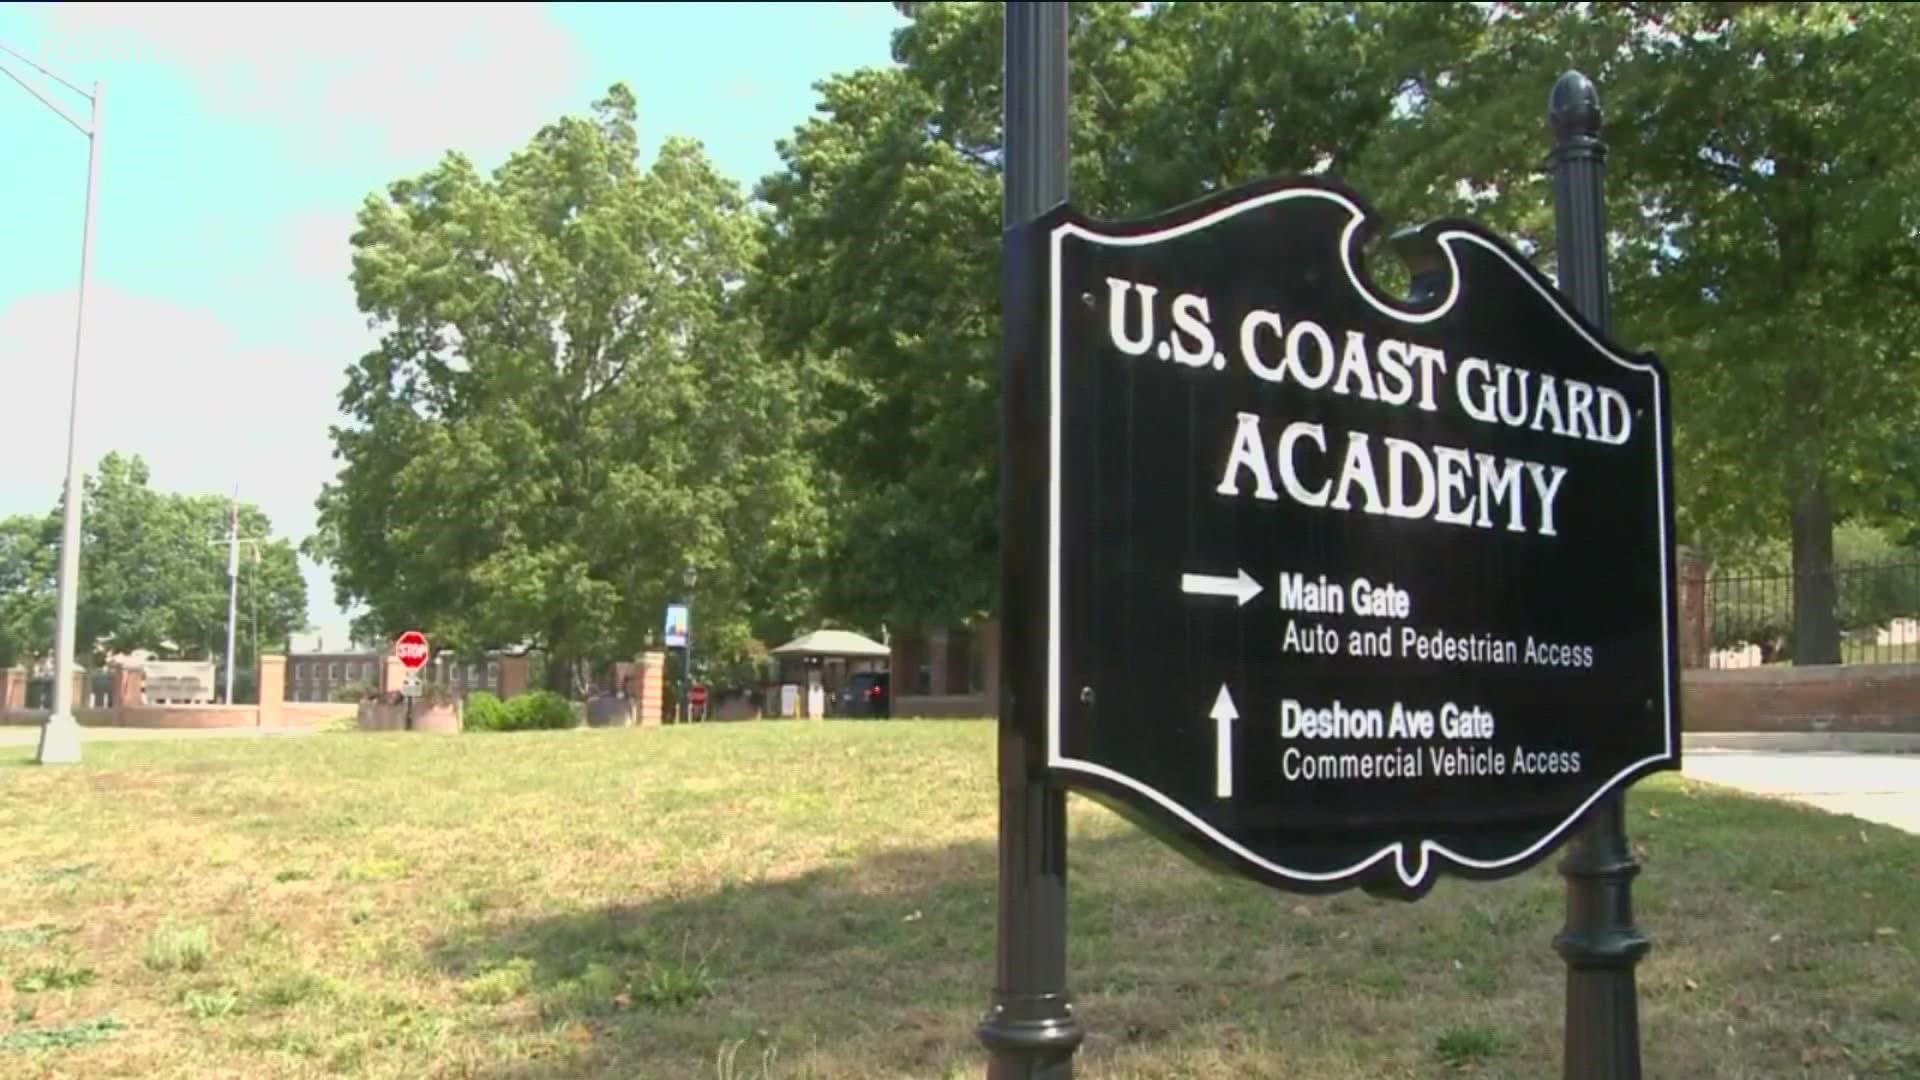 Seven cadets of the Coast Guard Academy are in the process of being disenrolled after an official said they did not comply with the military's COVID-19 vaccination.